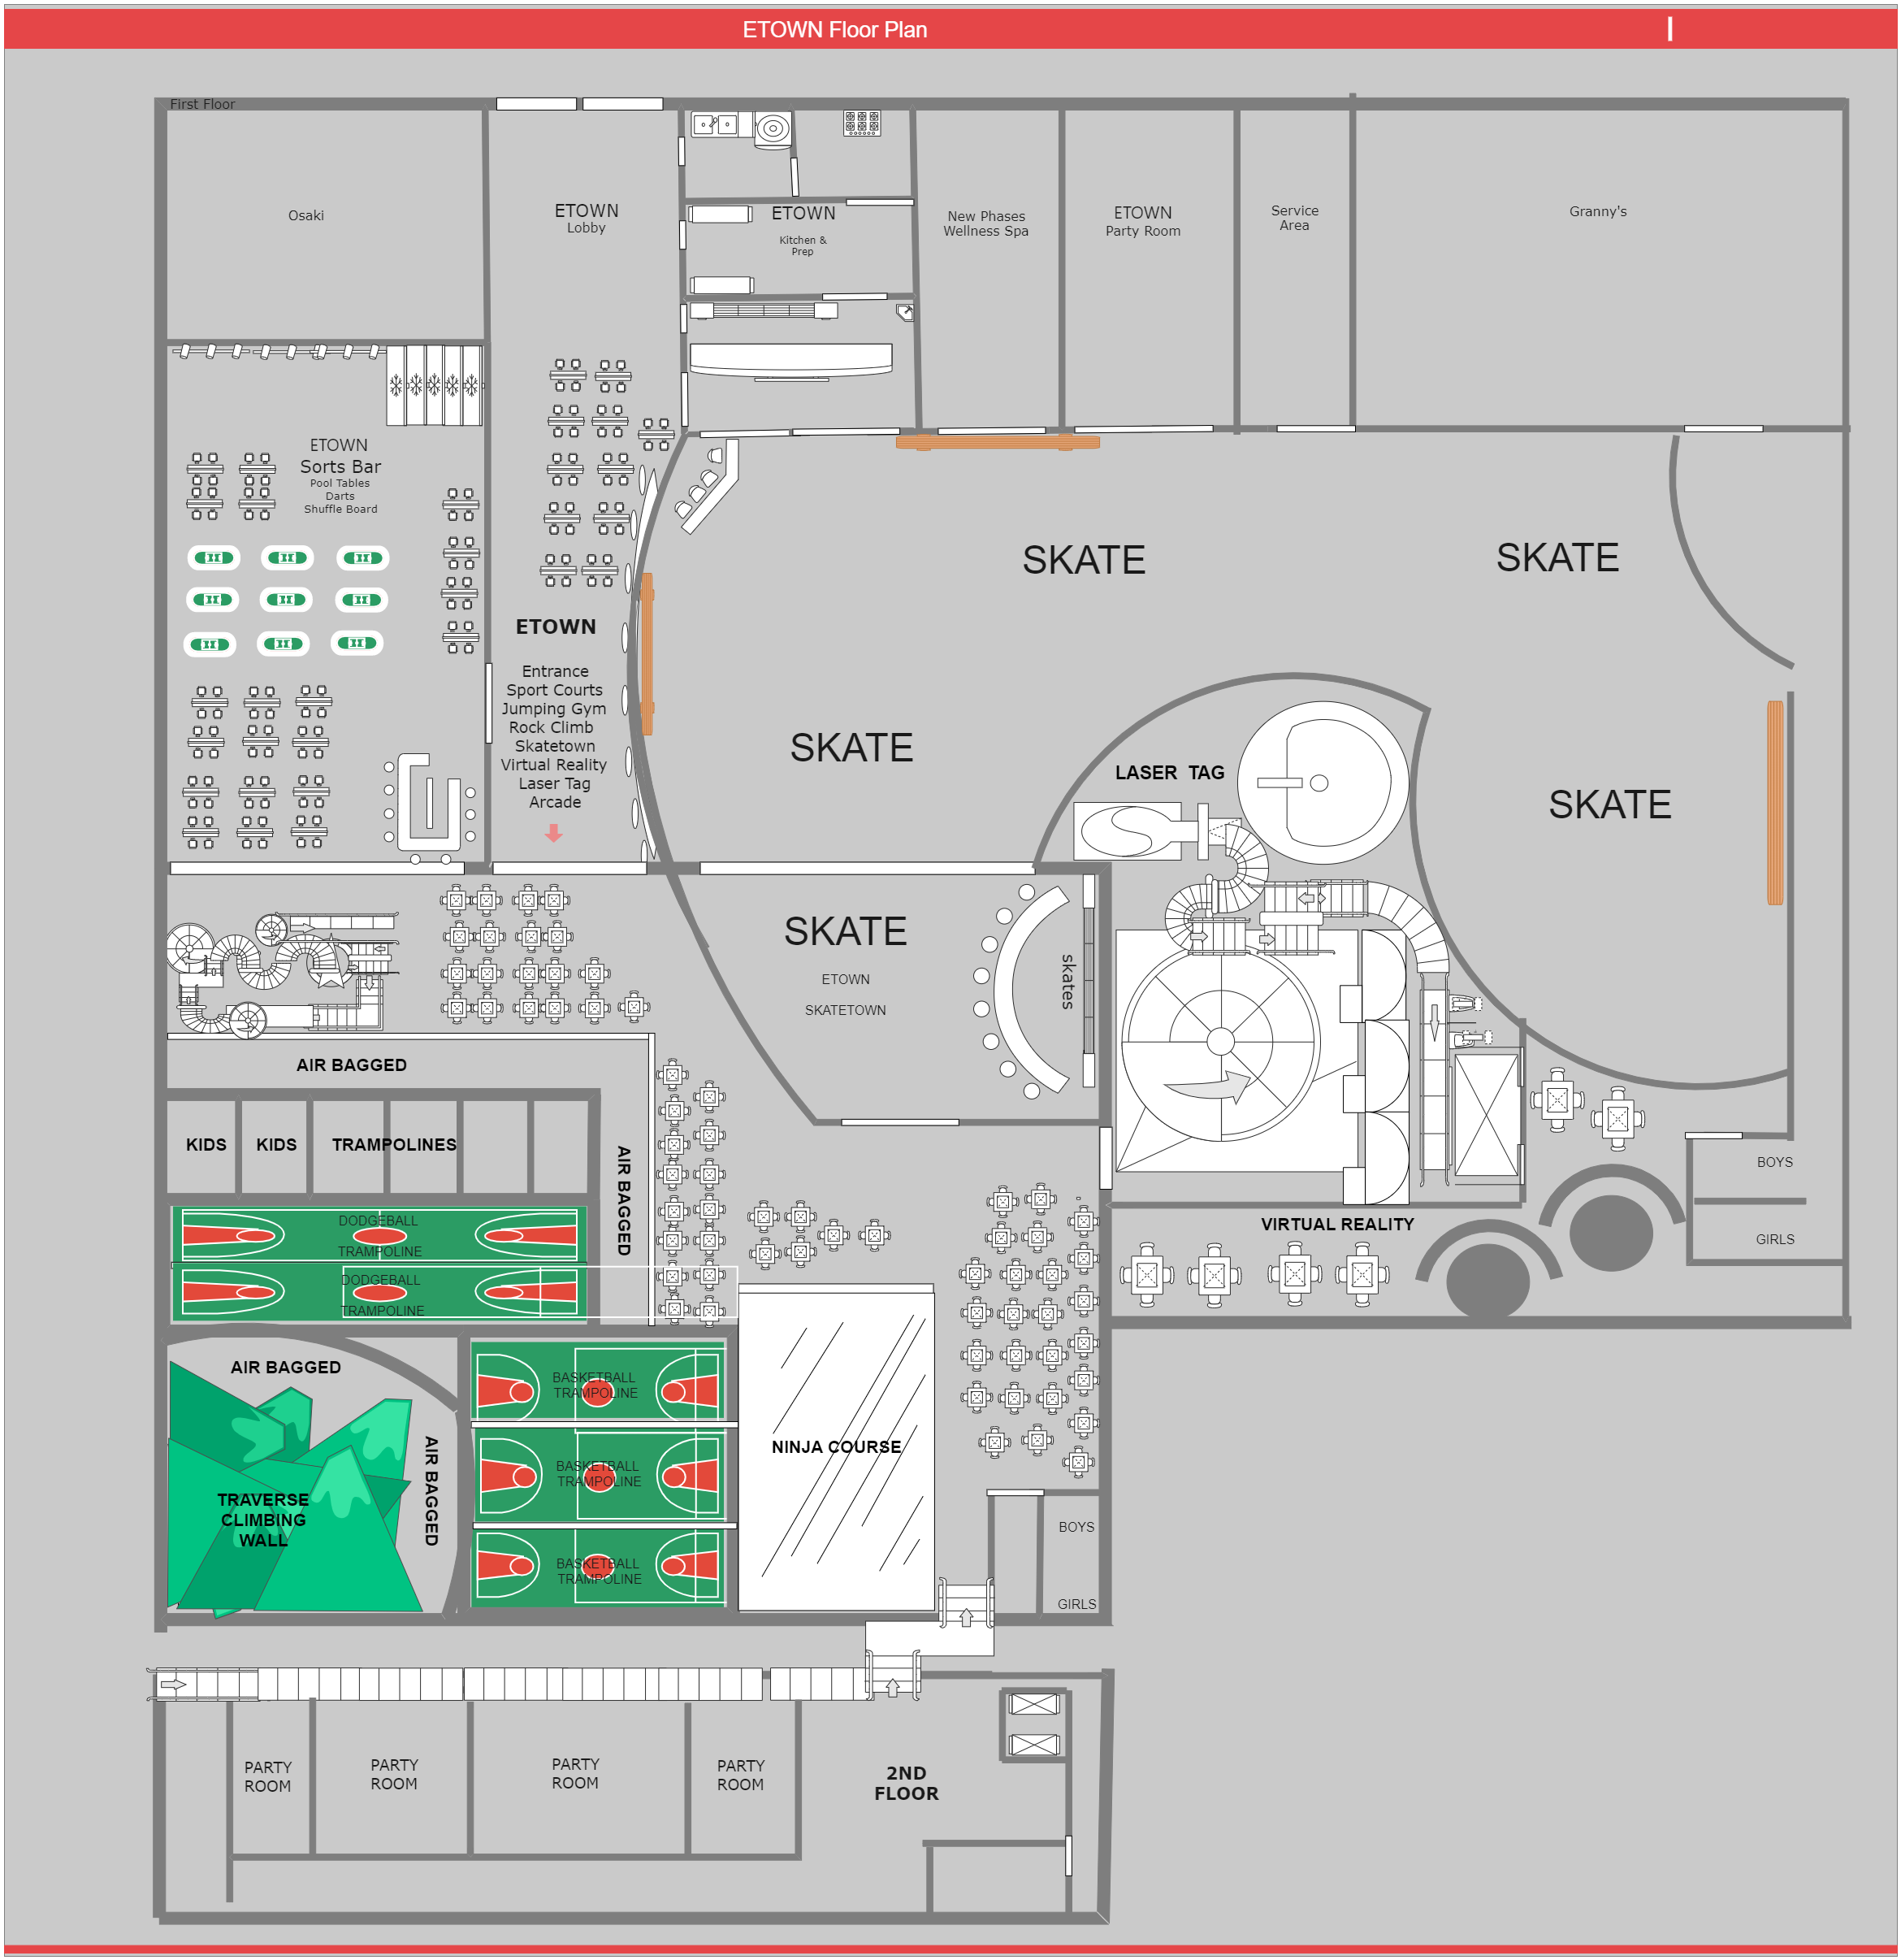 A mall floor plan begins with an architectural floor plan and adds ideas for traffic flow, zones, category adjacencies, and a fixture arrangement, according to a visual merchandising specialist at pop-up go, which assists merchants in securing, designing,